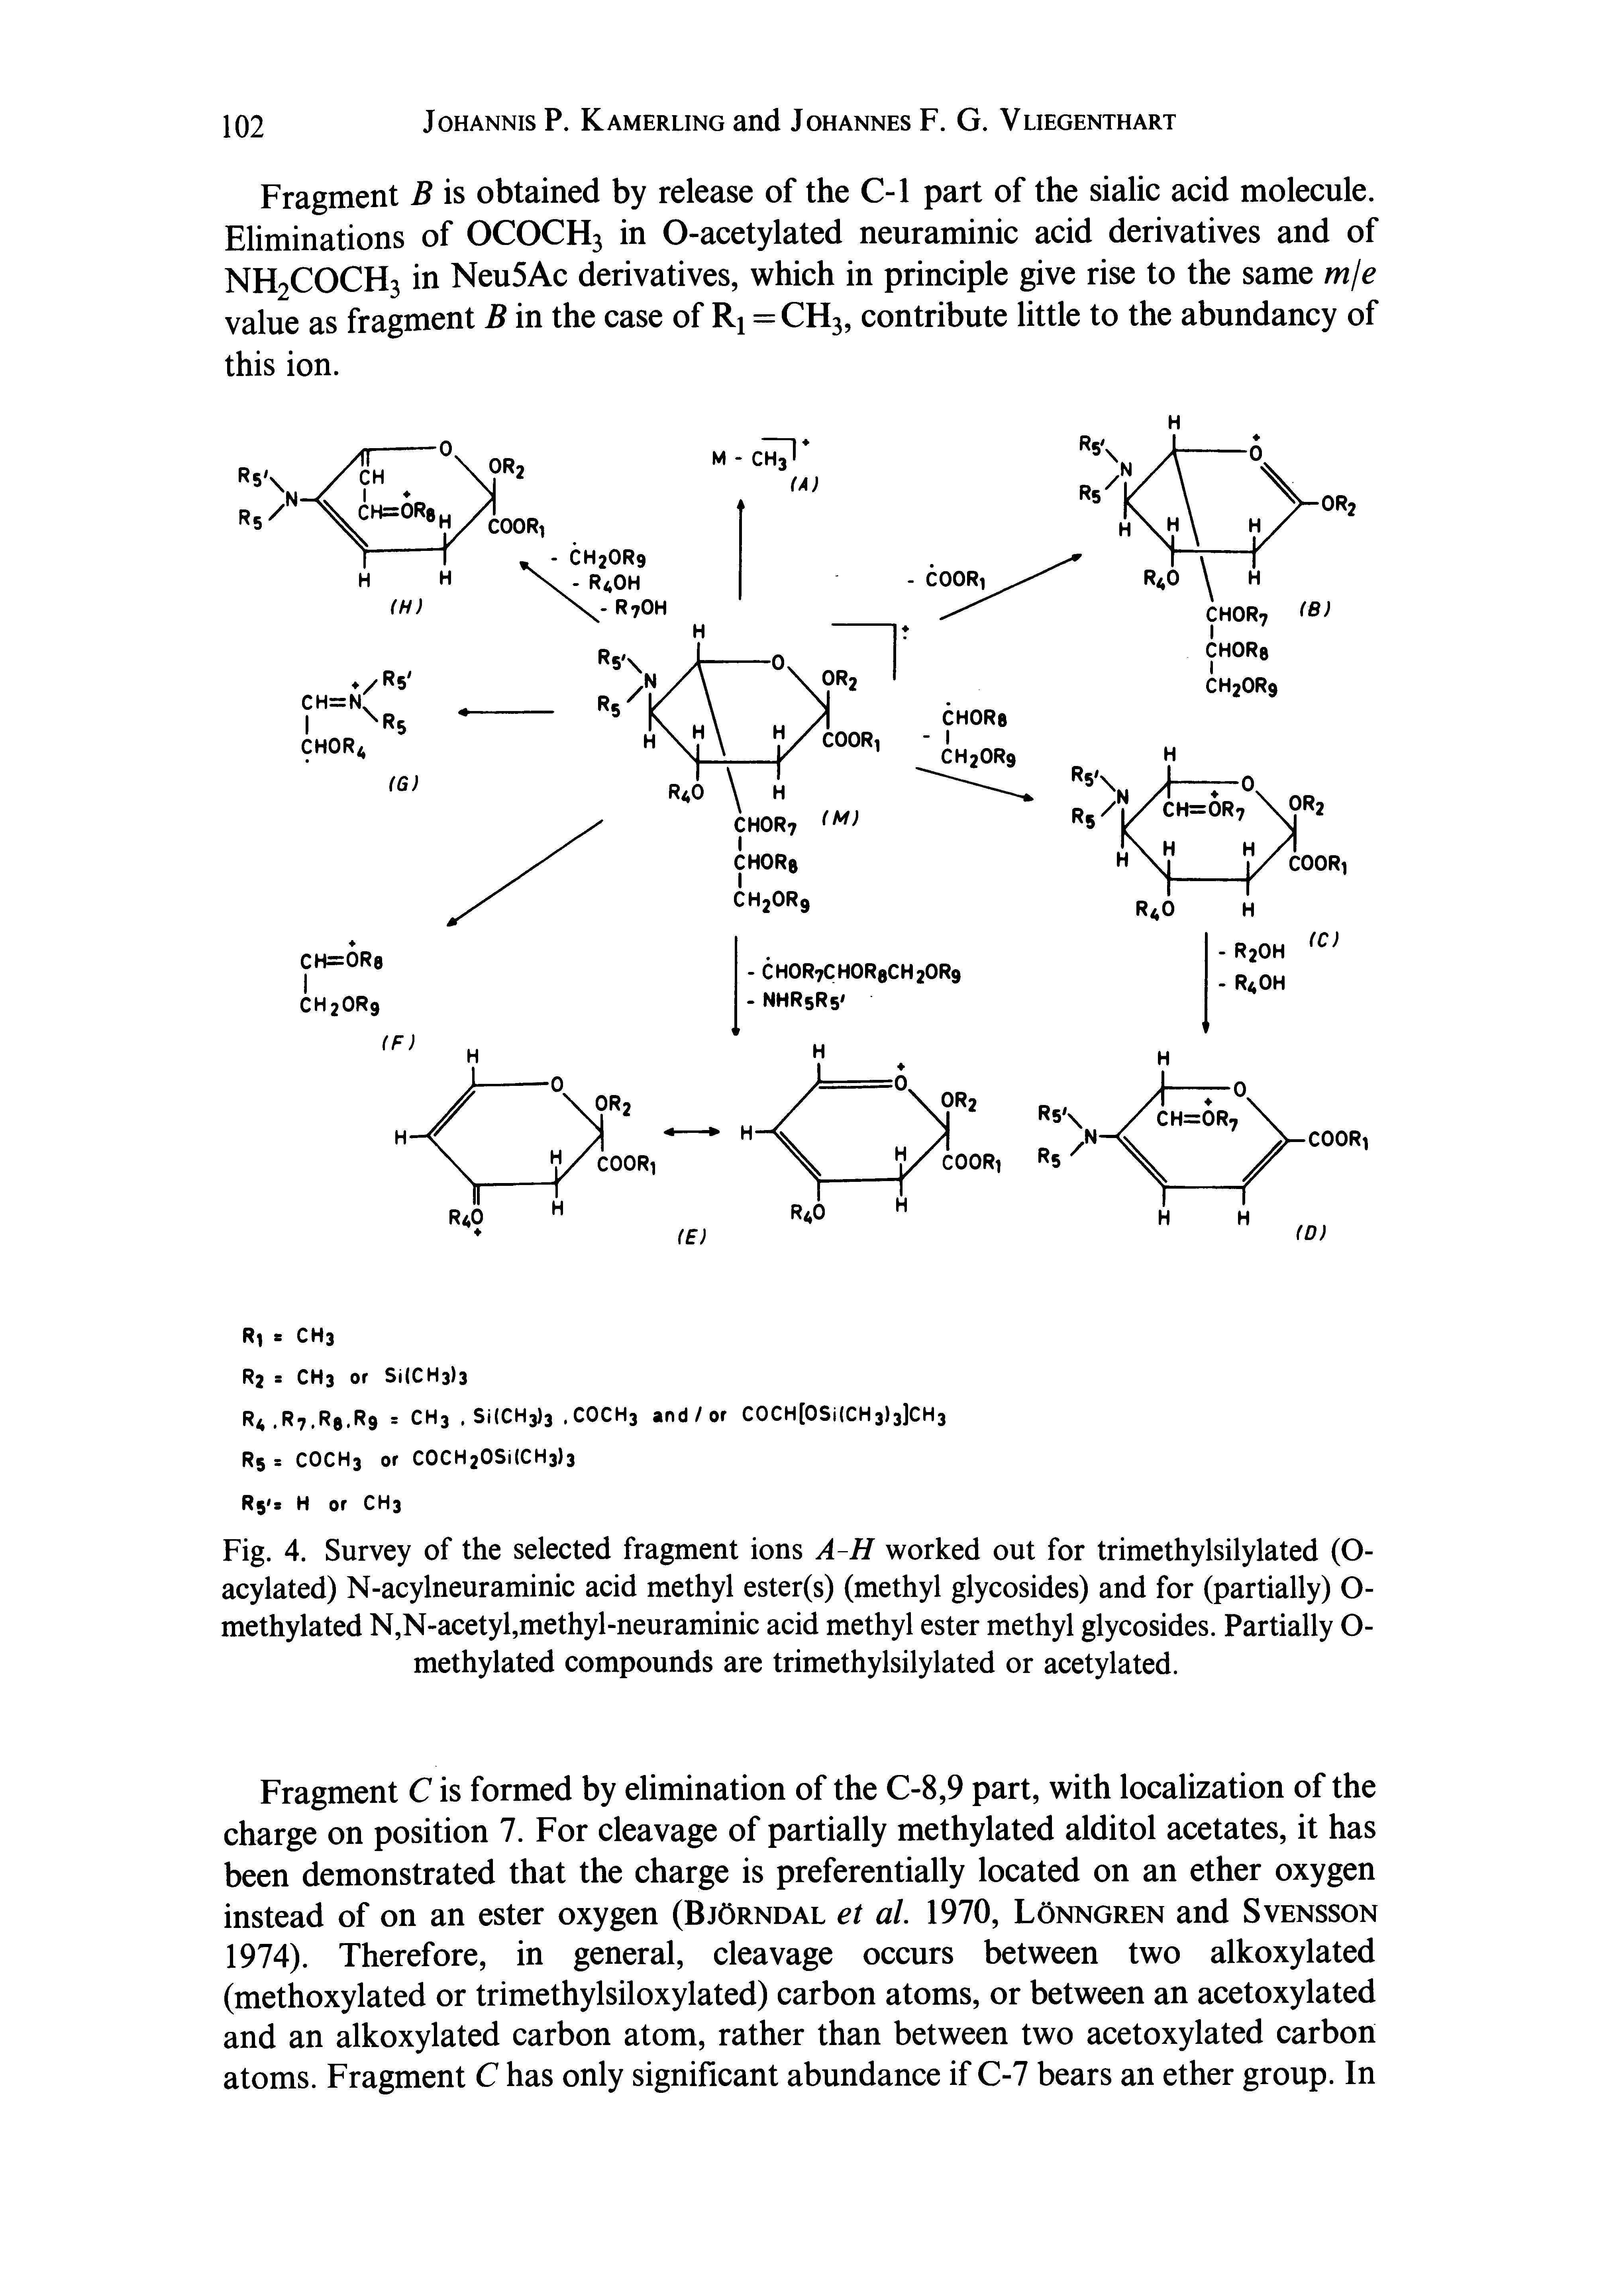 Fig. 4. Survey of the selected fragment ions A-H worked out for trimethylsilylated (O-acylated) N-acylneuraminic acid methyl ester(s) (methyl glycosides) and for (partially) O-methylated N,N>acetyl,methyl-neuraminic acid methyl ester methyl glycosides. Partially O-methylated compounds are trimethylsilylated or acetylated.